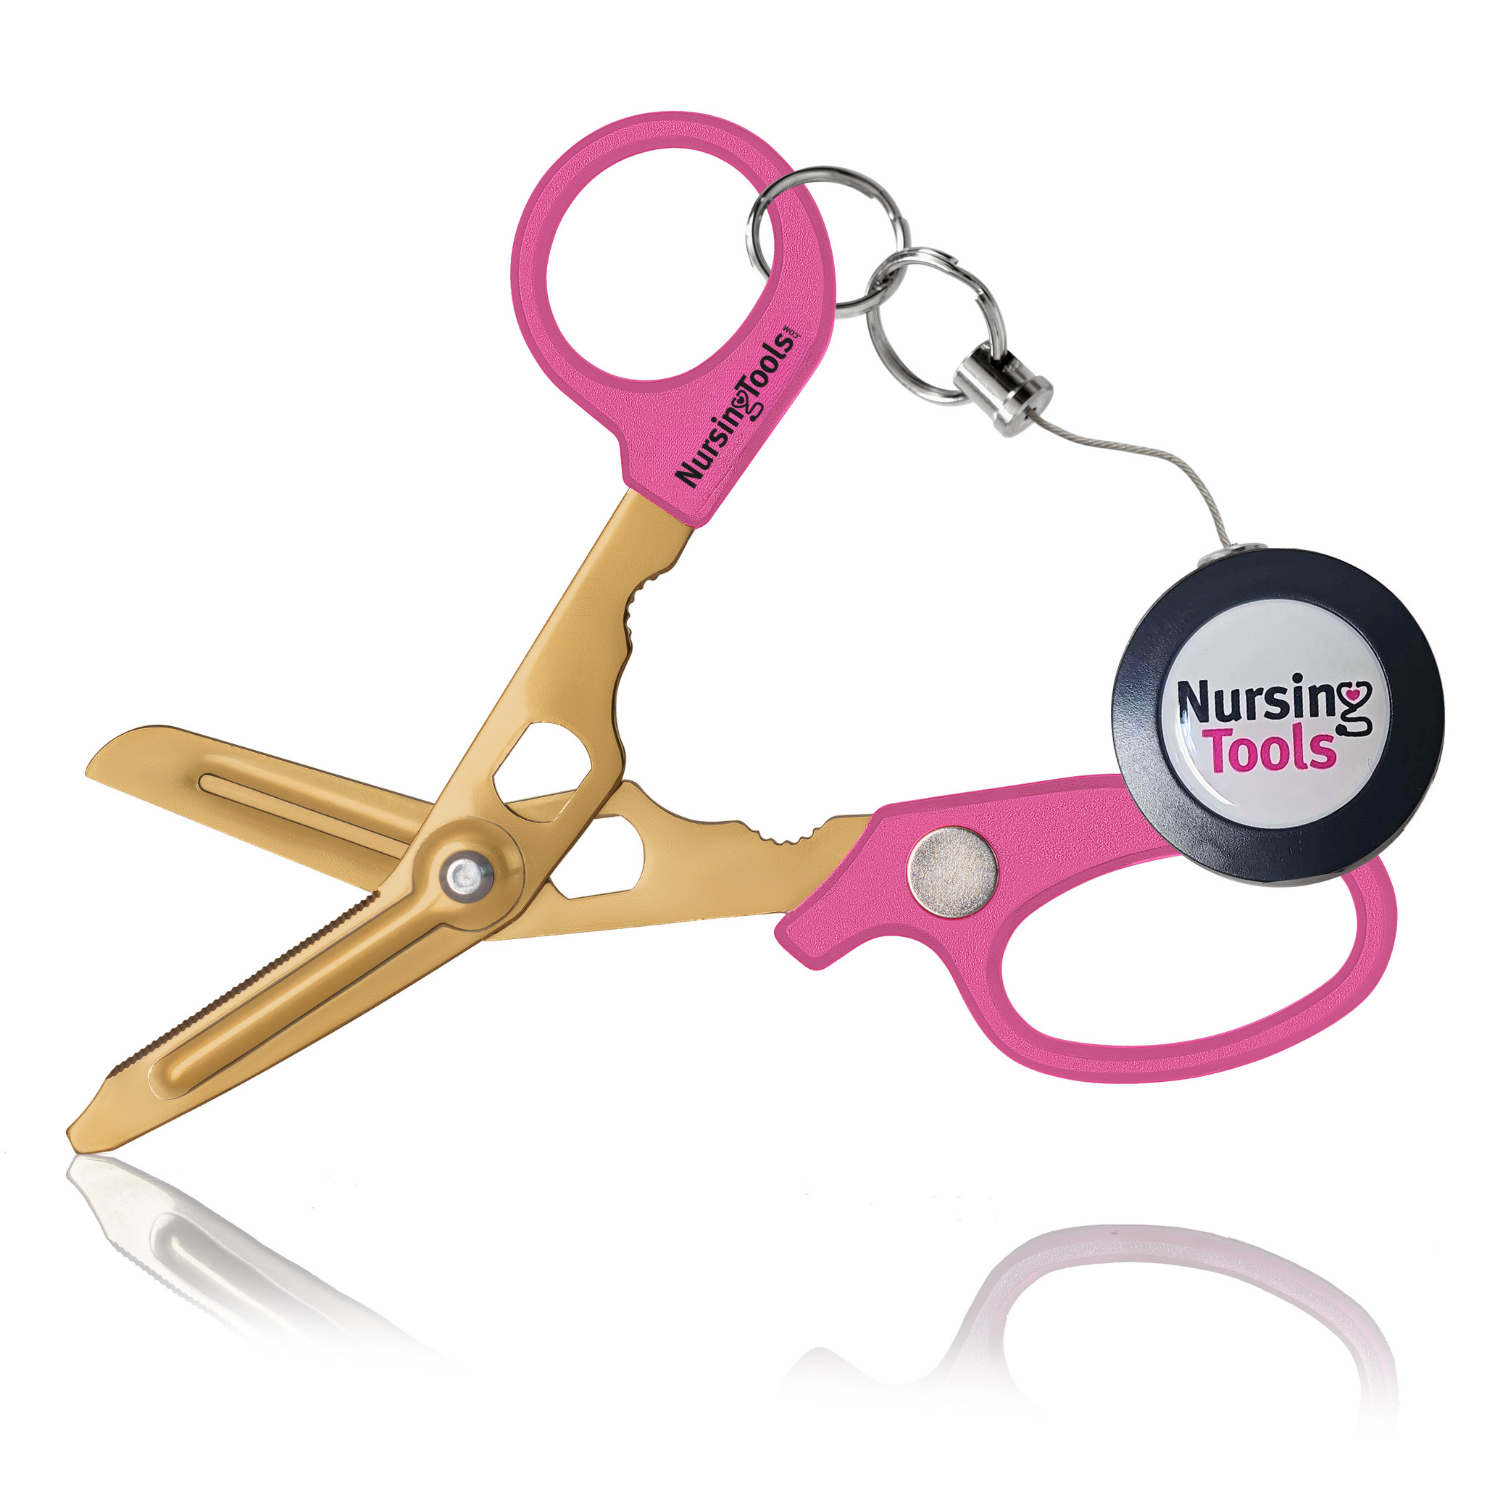 Mini Folding Scissors - Attach to Badge Reel or Keychain - Small but Sharp